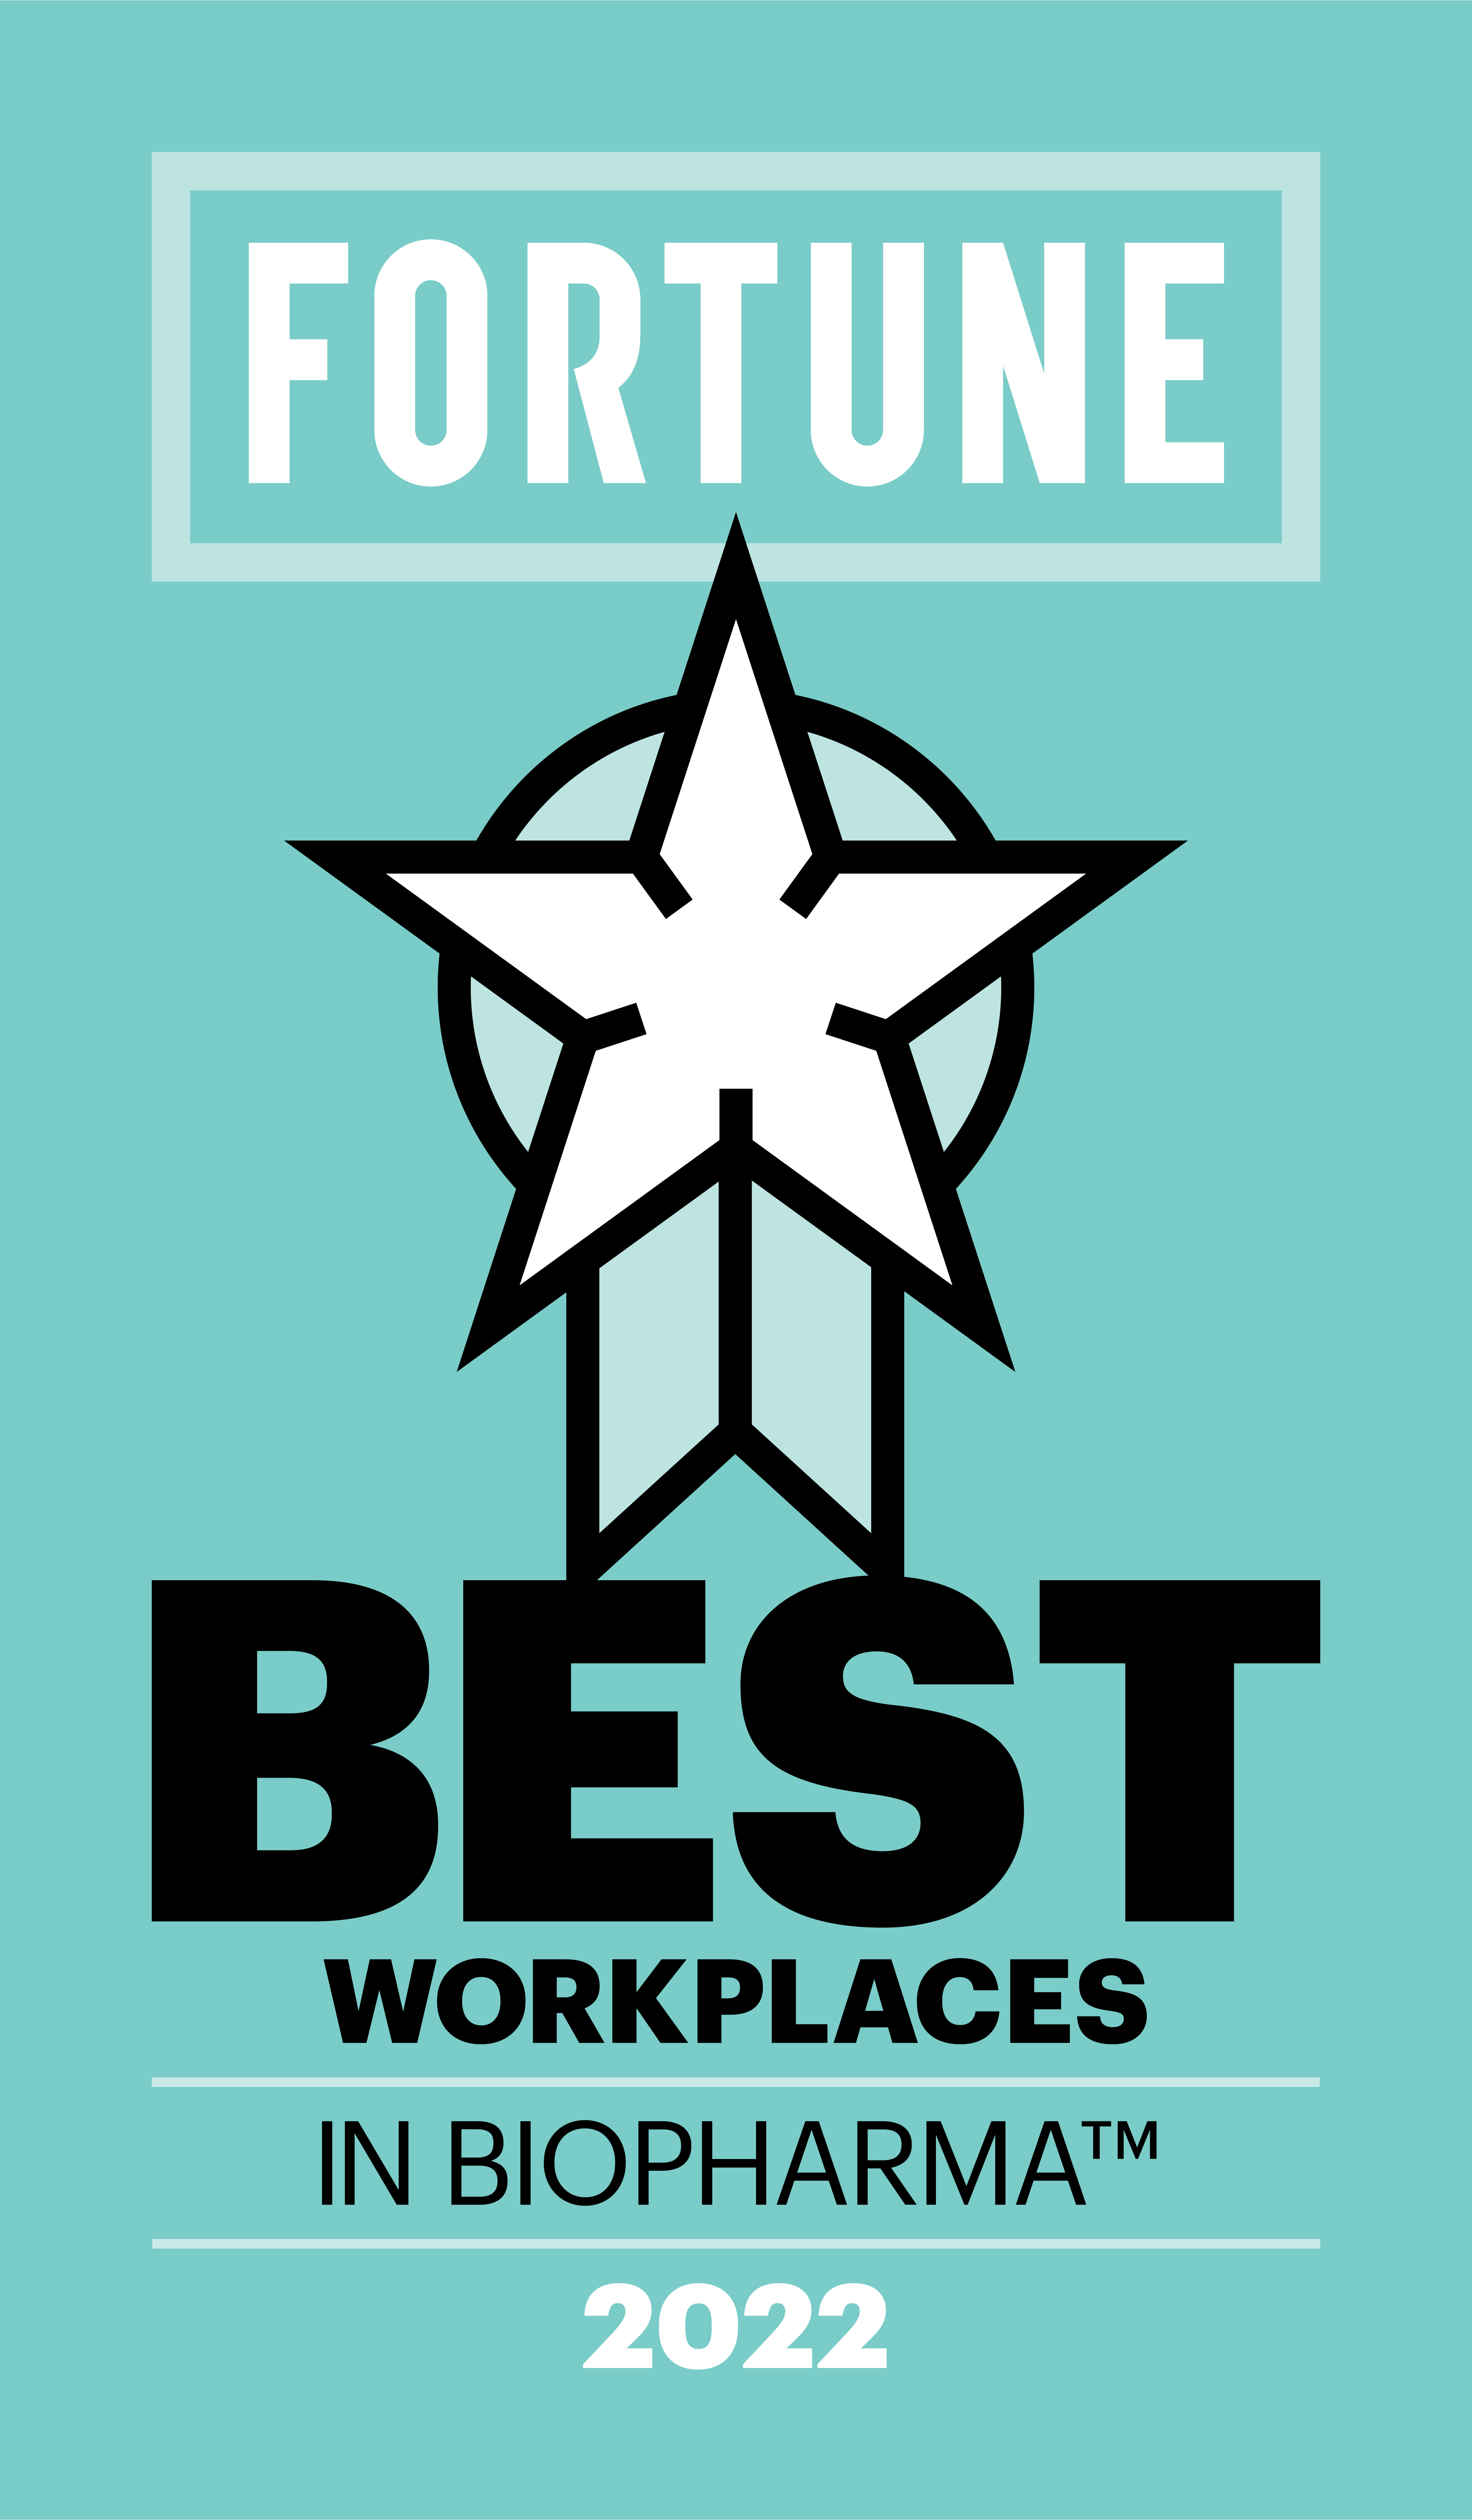 Fortune best workplaces in Biopharma 2022 badge